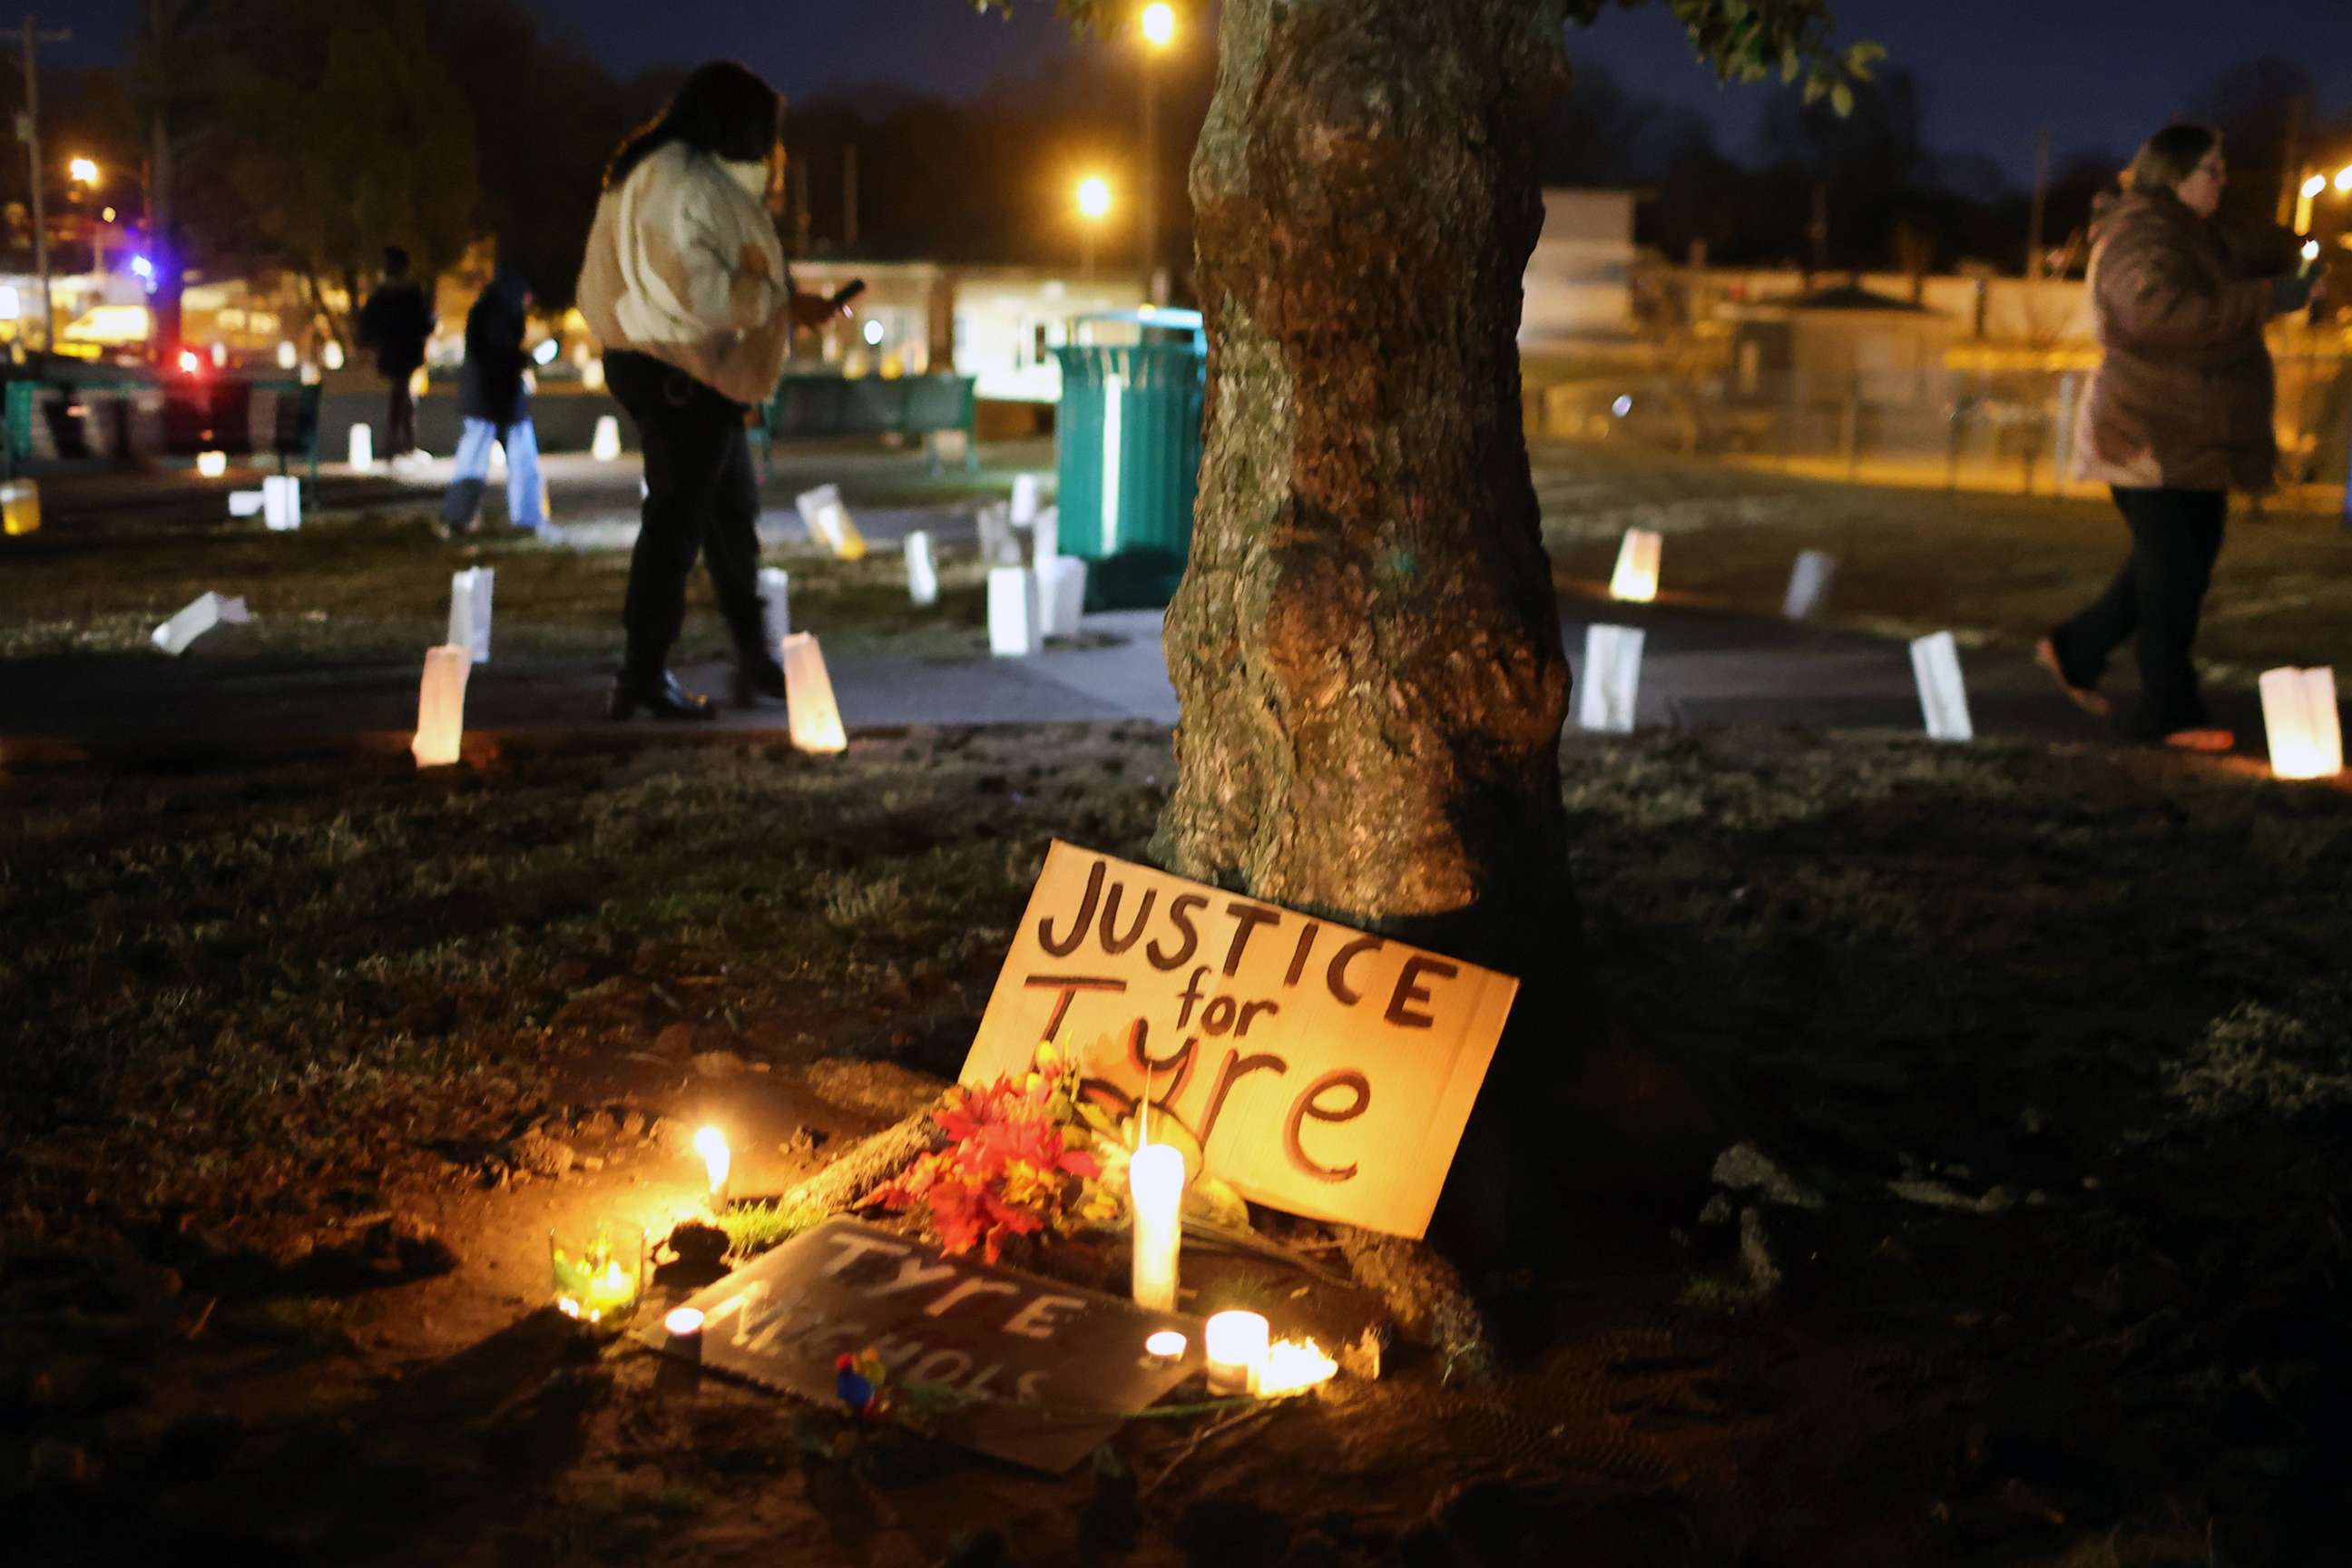 PHOTO: People attend a candlelight vigil in memory of Tyre Nichols at the Tobey Skate Park on Jan. 26, 2023 in Memphis, Tenn.